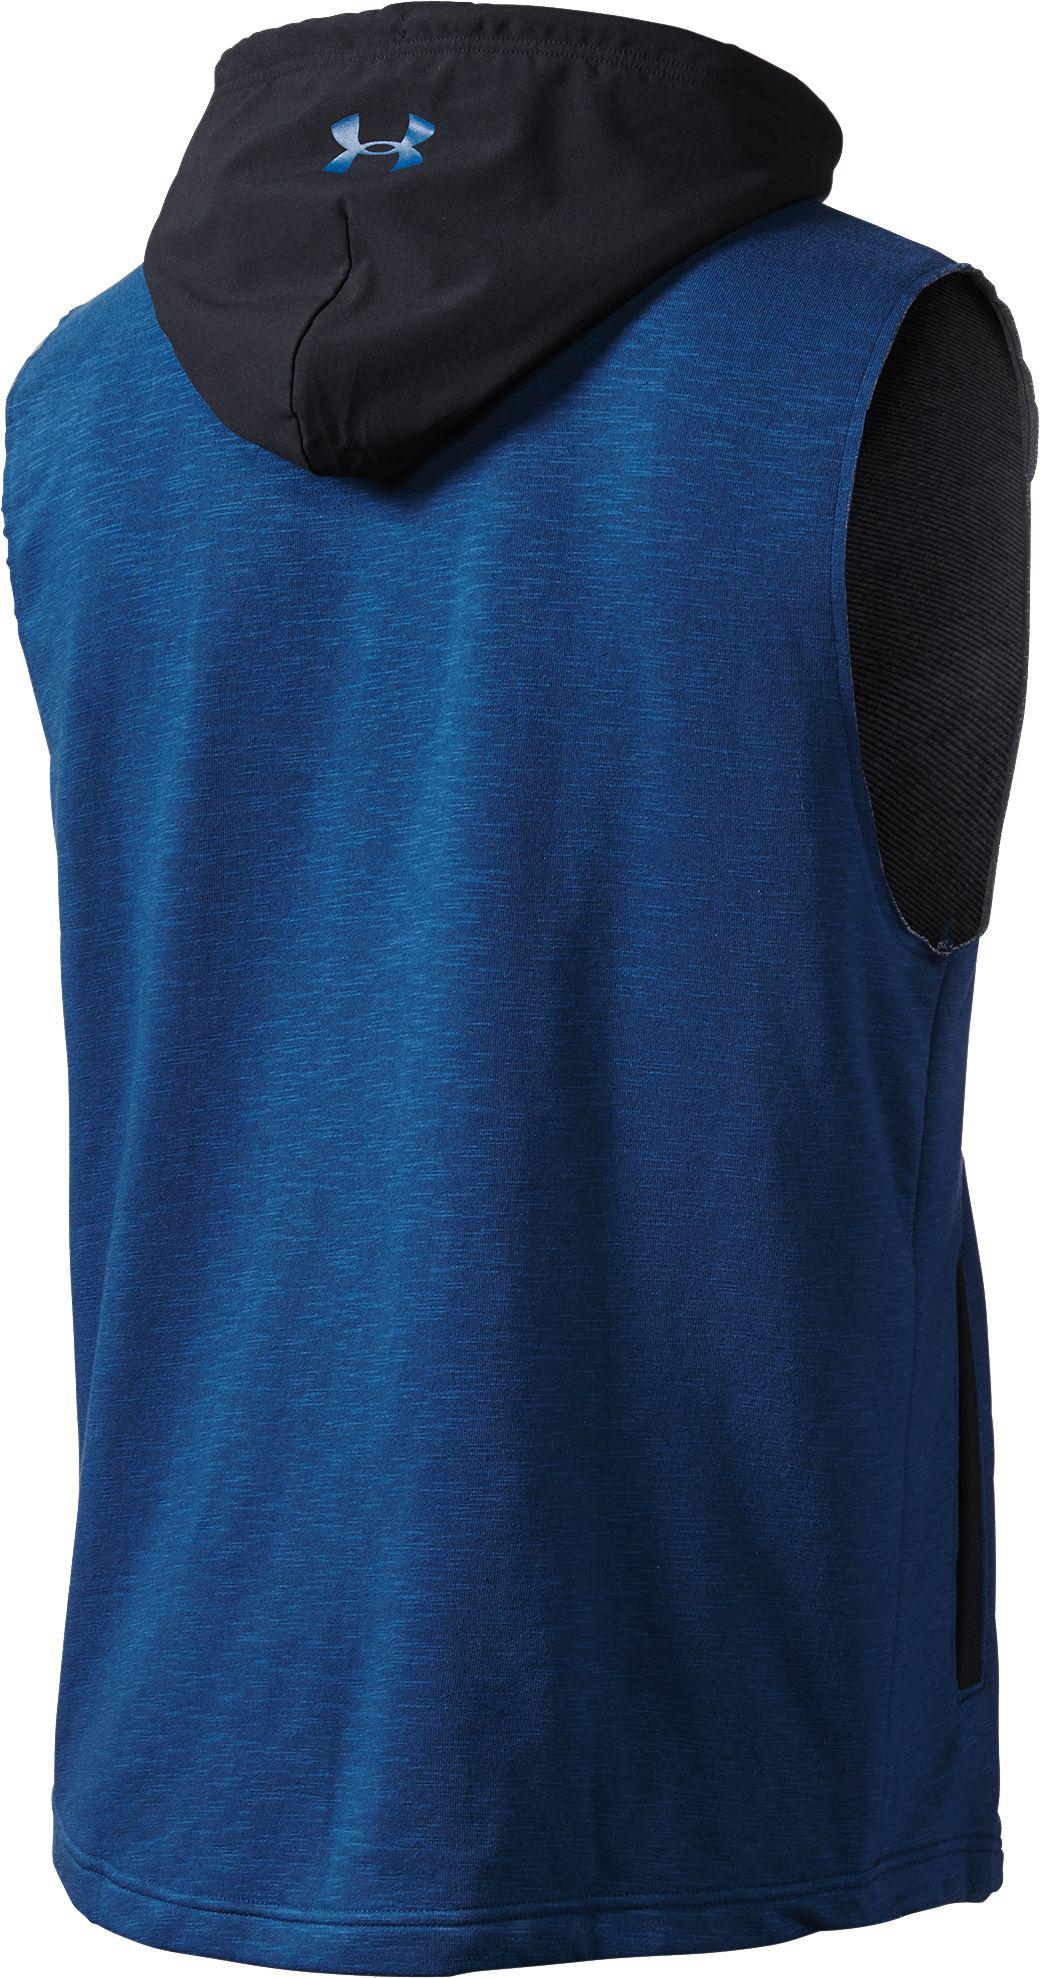 Lyst - Under Armour Sportstyle Sleeveless Hoodie in Blue for Men